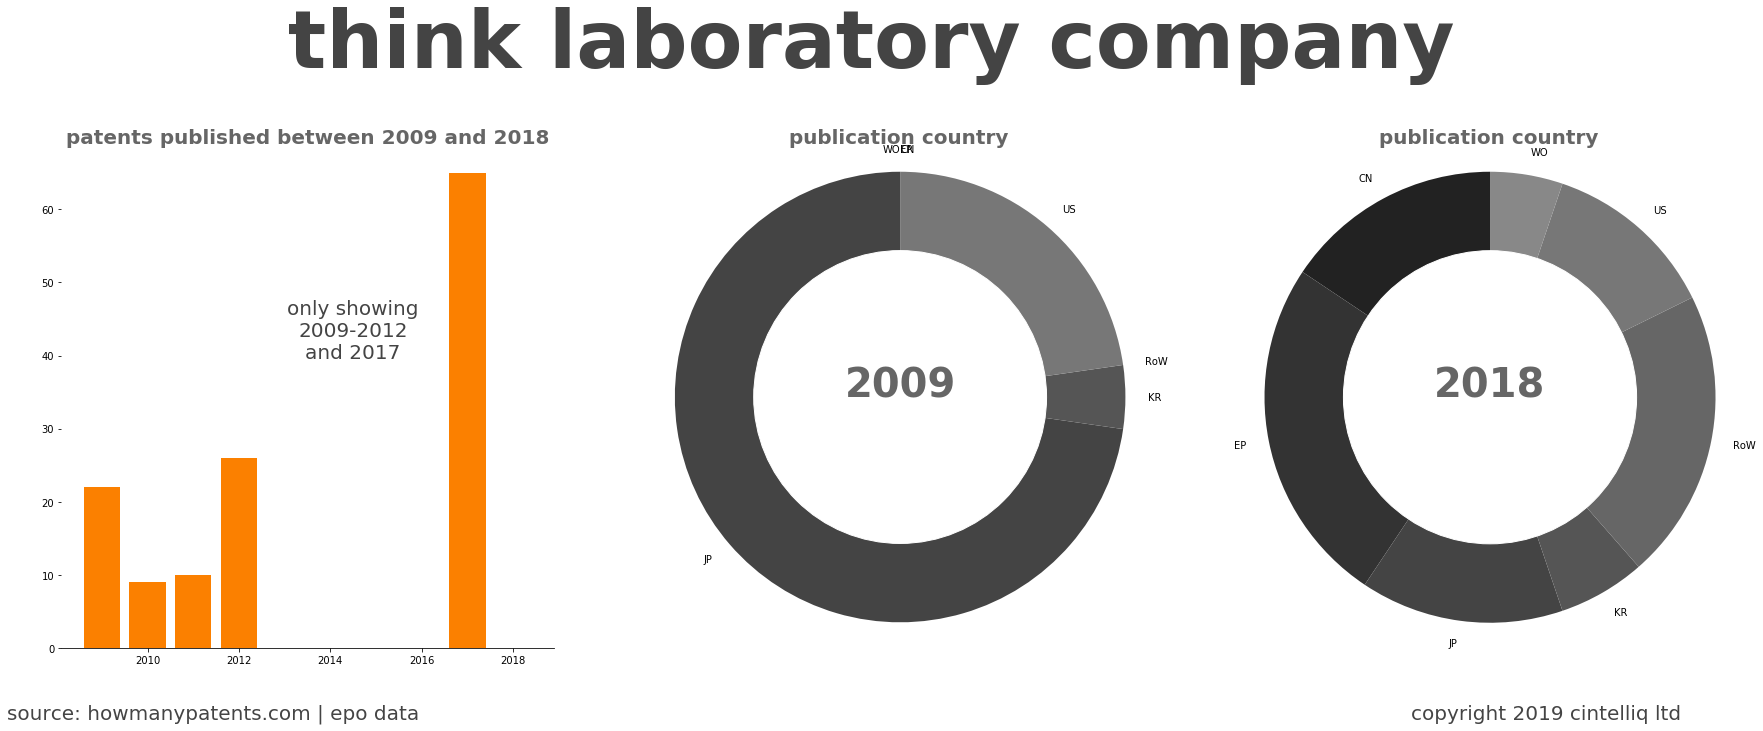 summary of patents for Think Laboratory Company